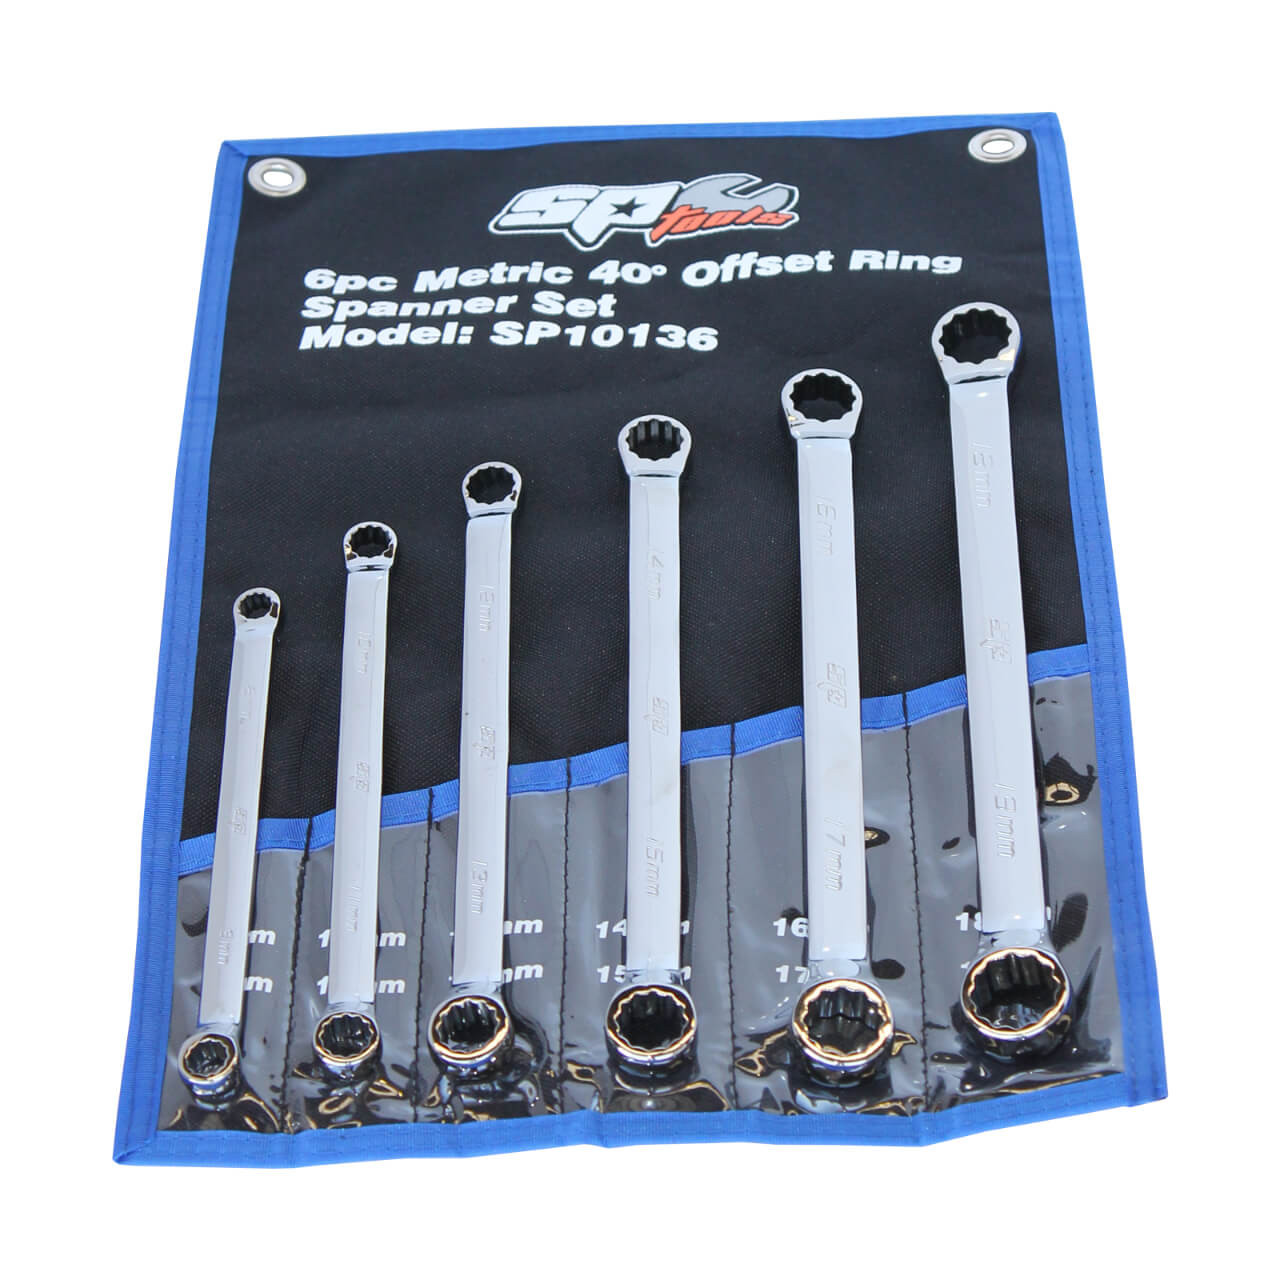 SP Tools 8-19mm 40° Offset Double Ring Spanner Set Metric 6pce